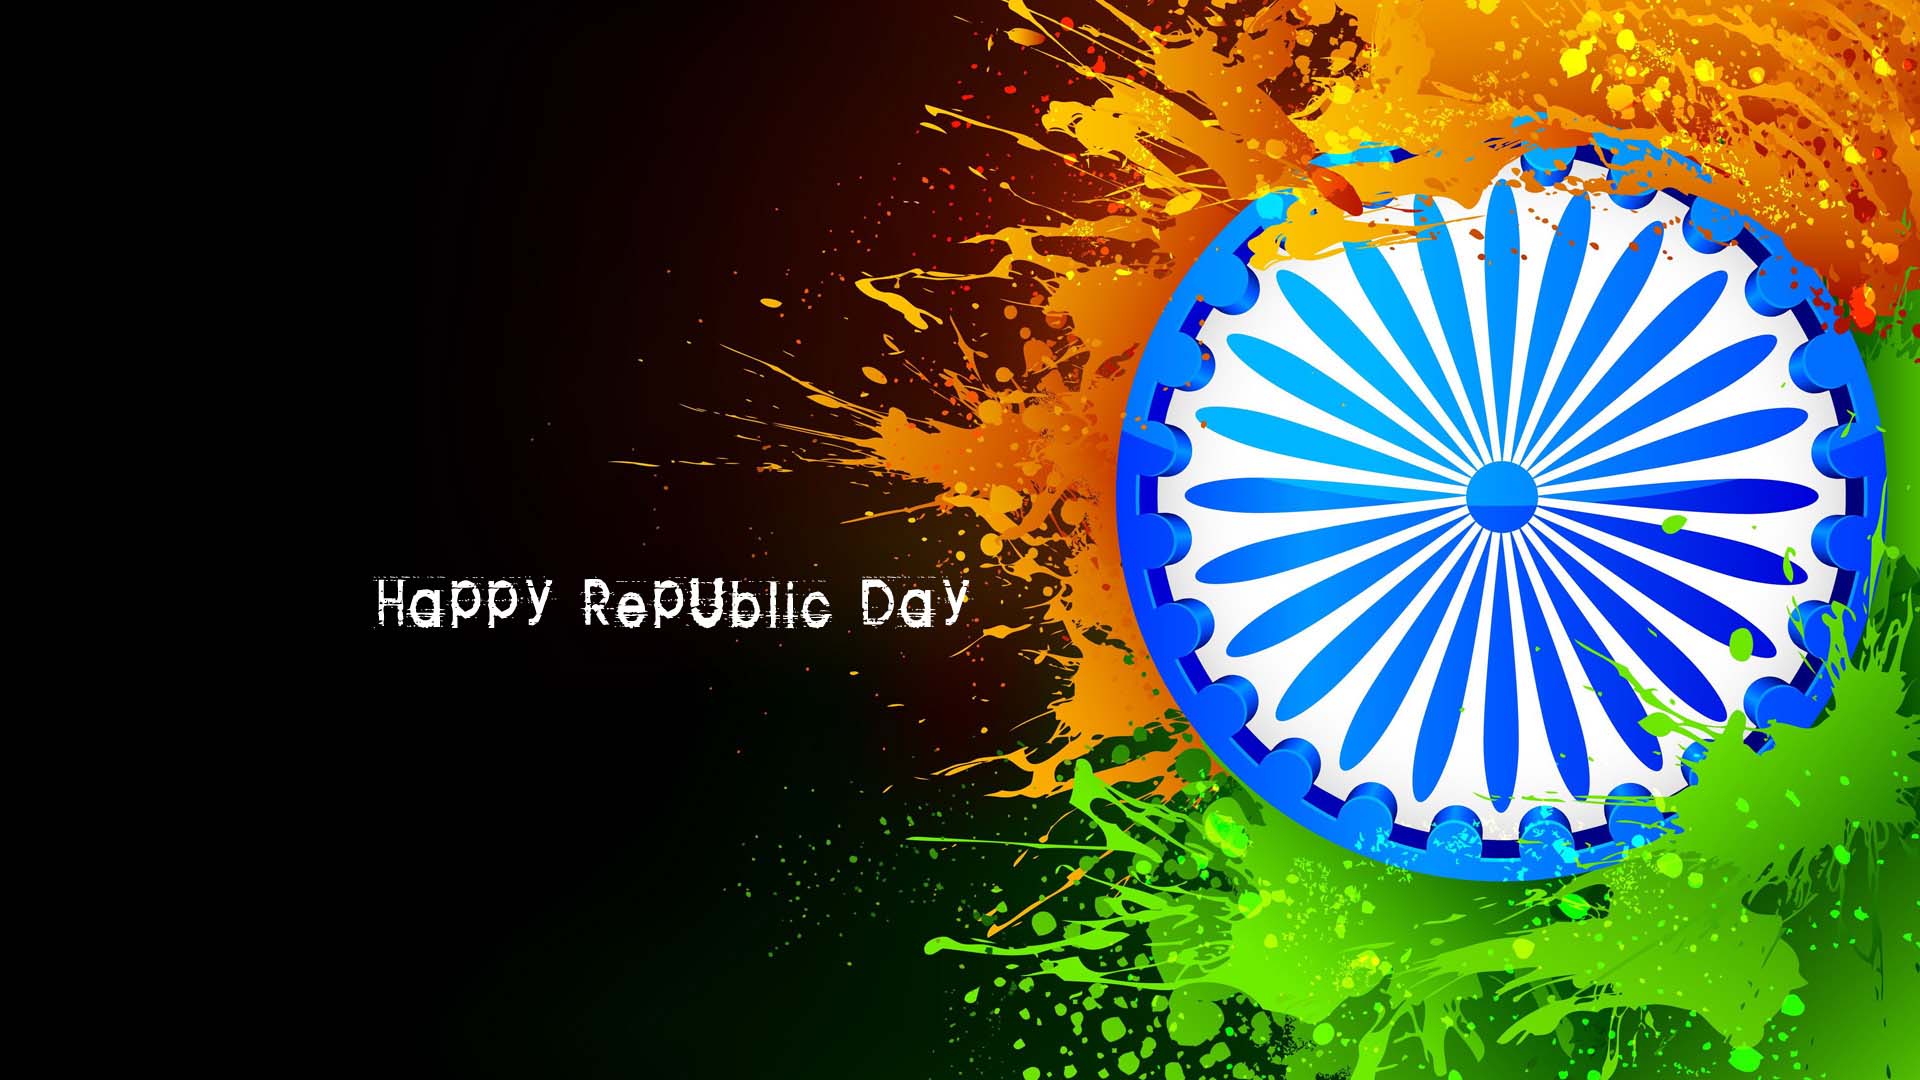 Indian Flag Wallpaper For Happy Republic Day Hd 1366×768 | Festivals